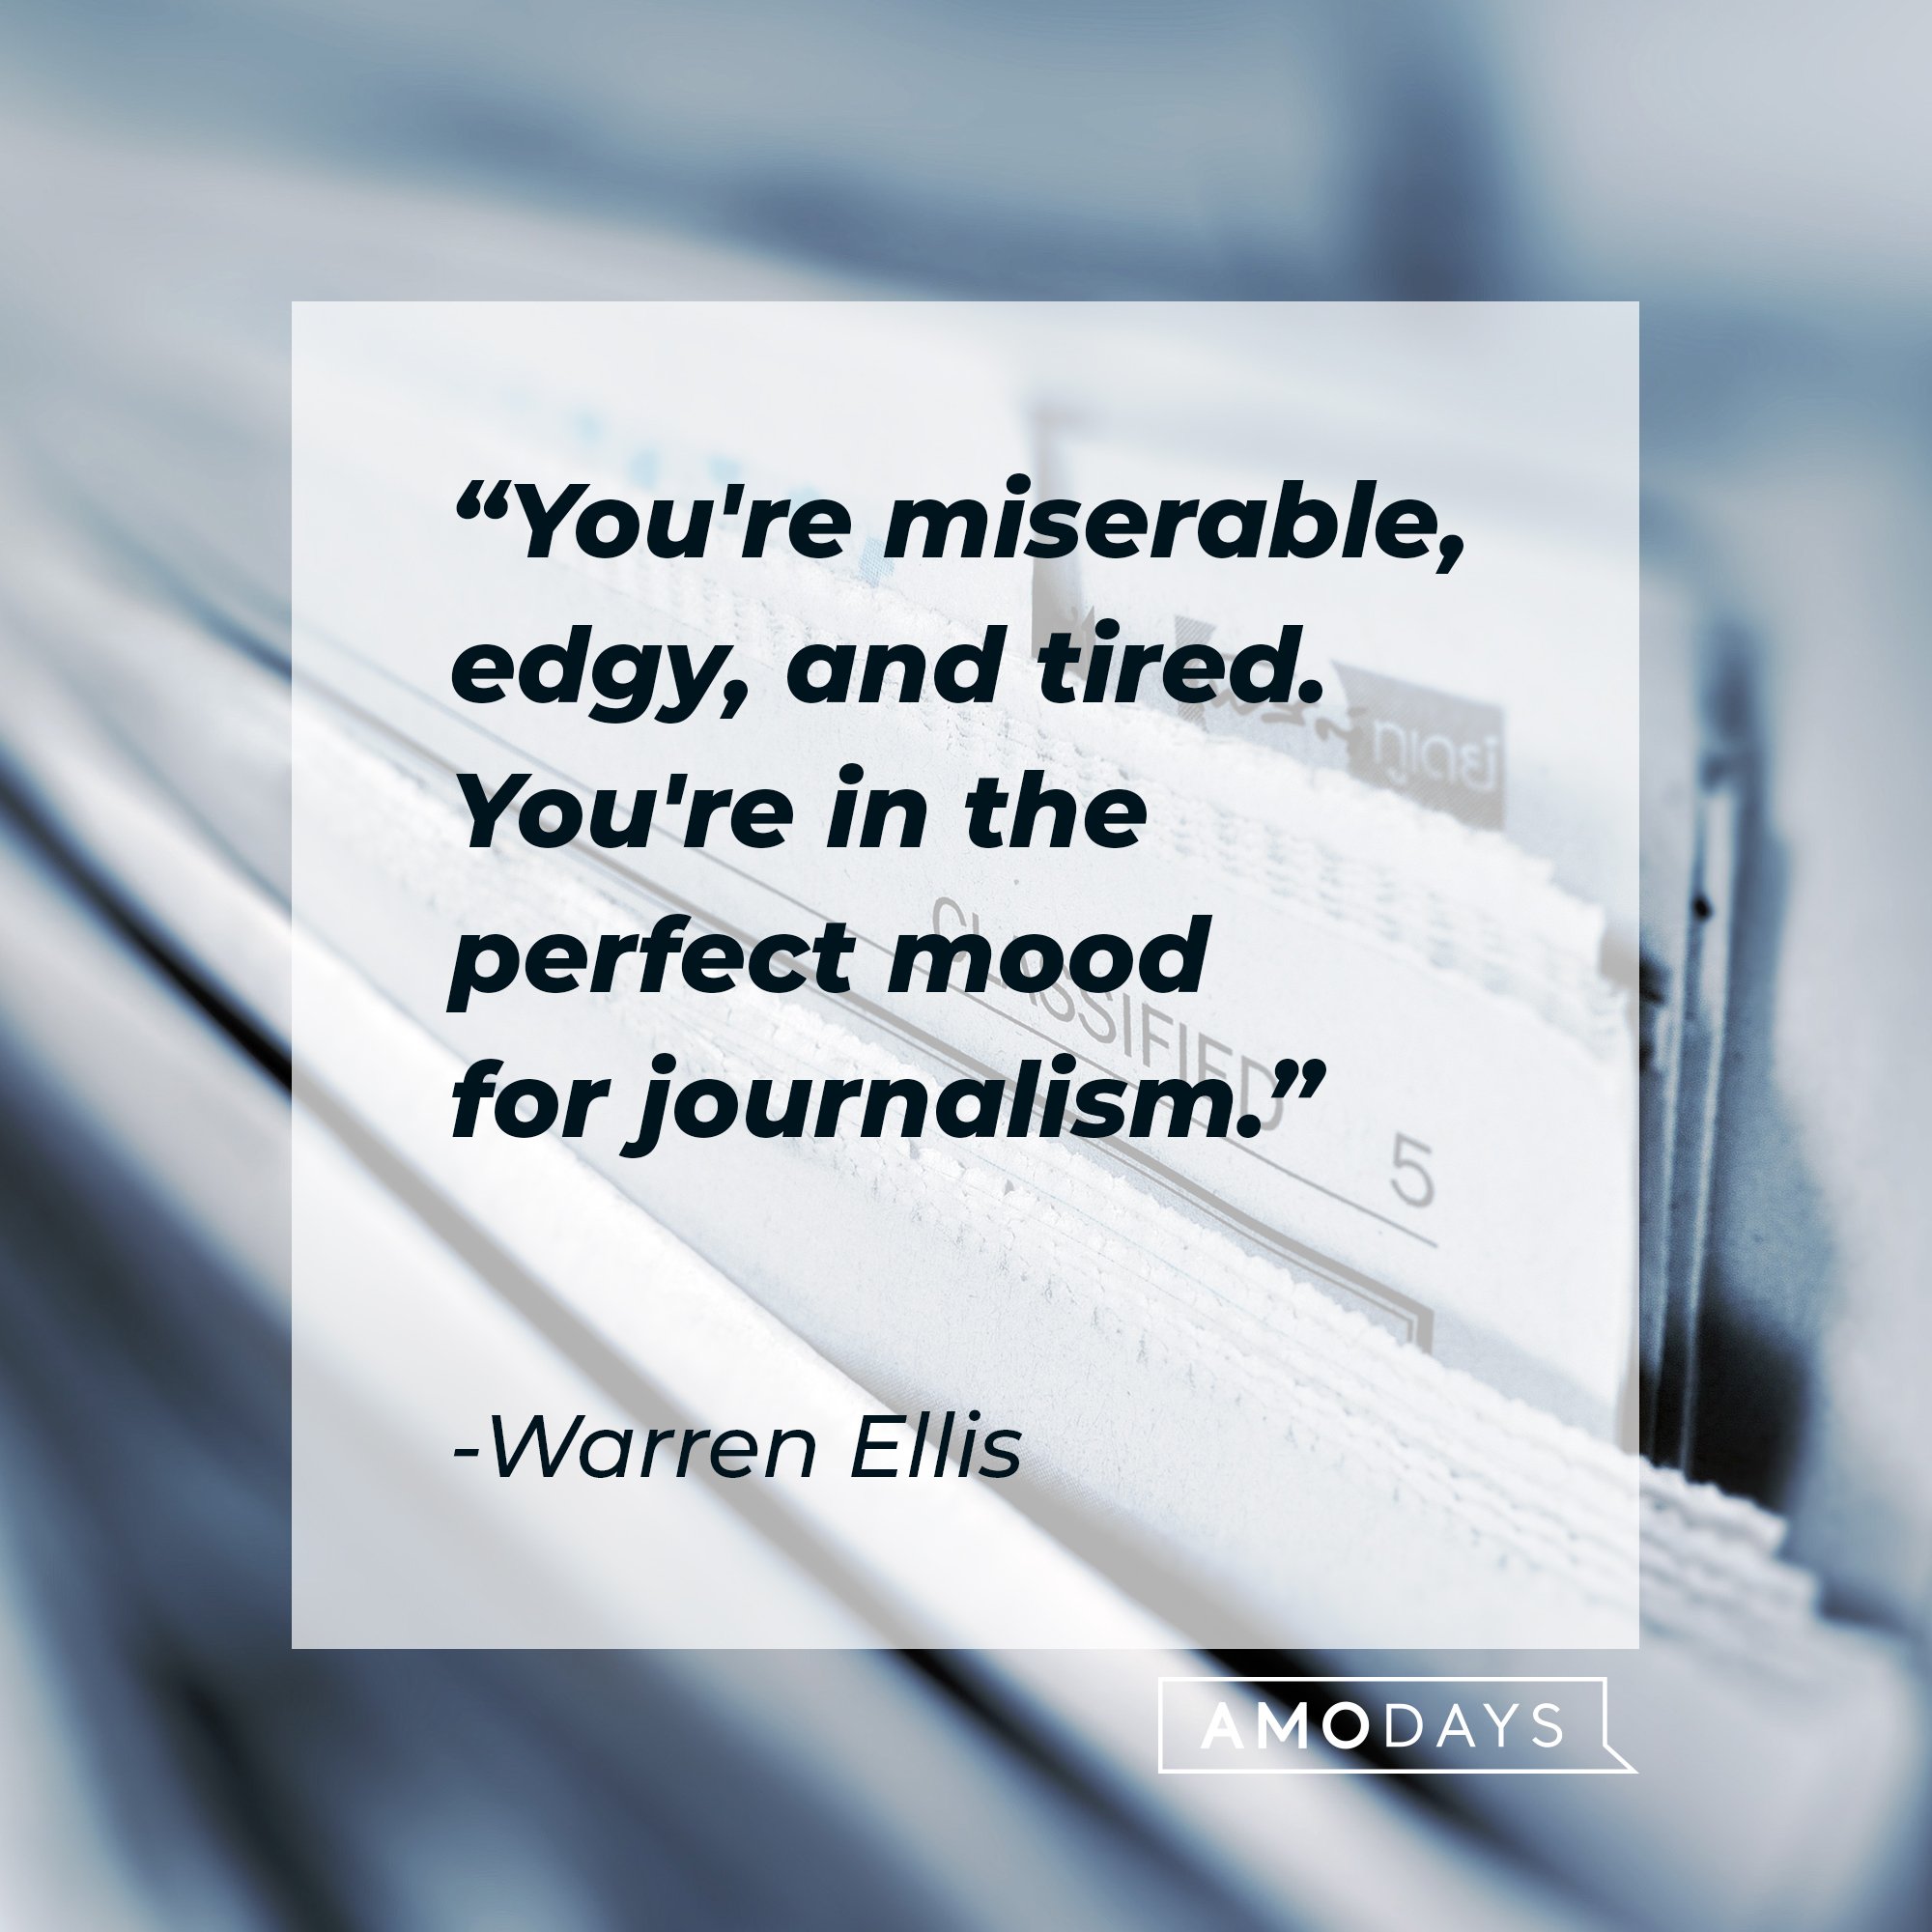 Warren Ellis’ quote: "You're miserable, edgy, and tired. You're in the perfect mood for journalism." | Image: AmoDays 